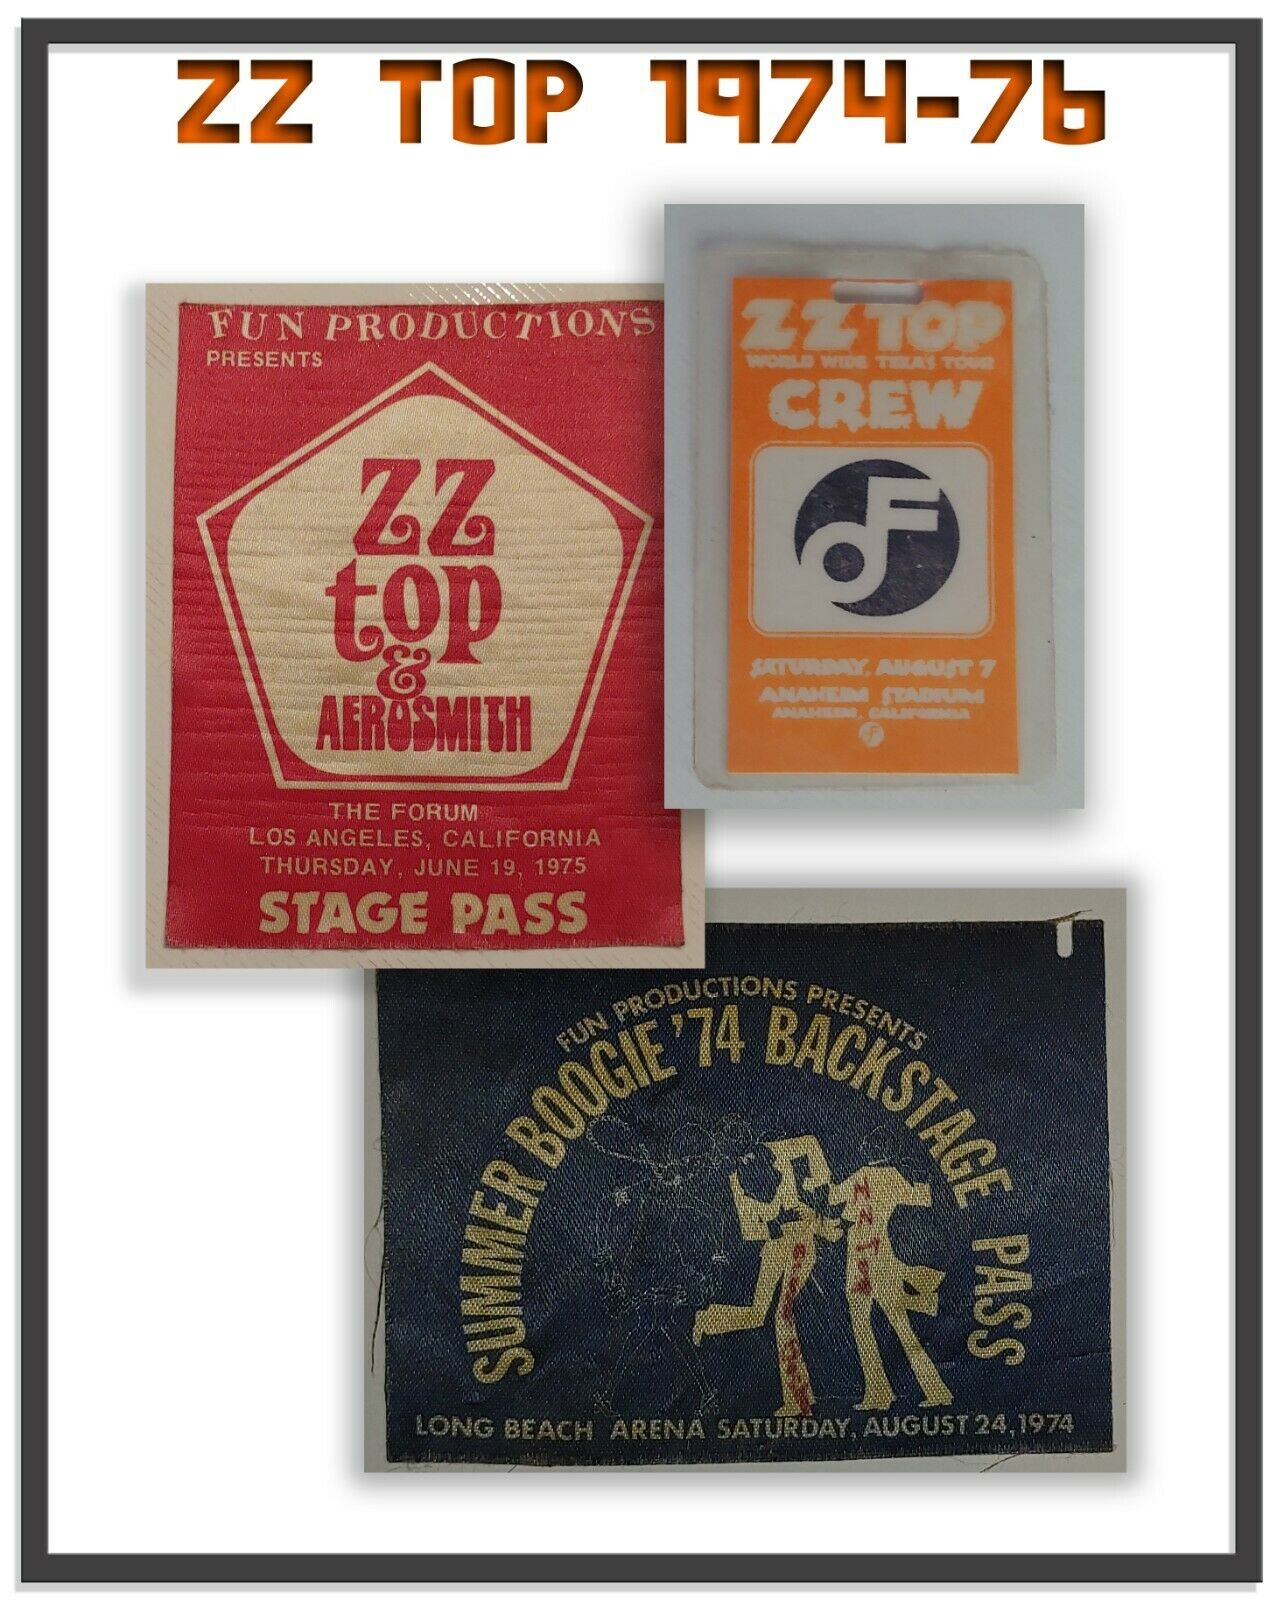 Zz Top 1974-1975-1976 / Backstage Passes / Fun Productions Ca